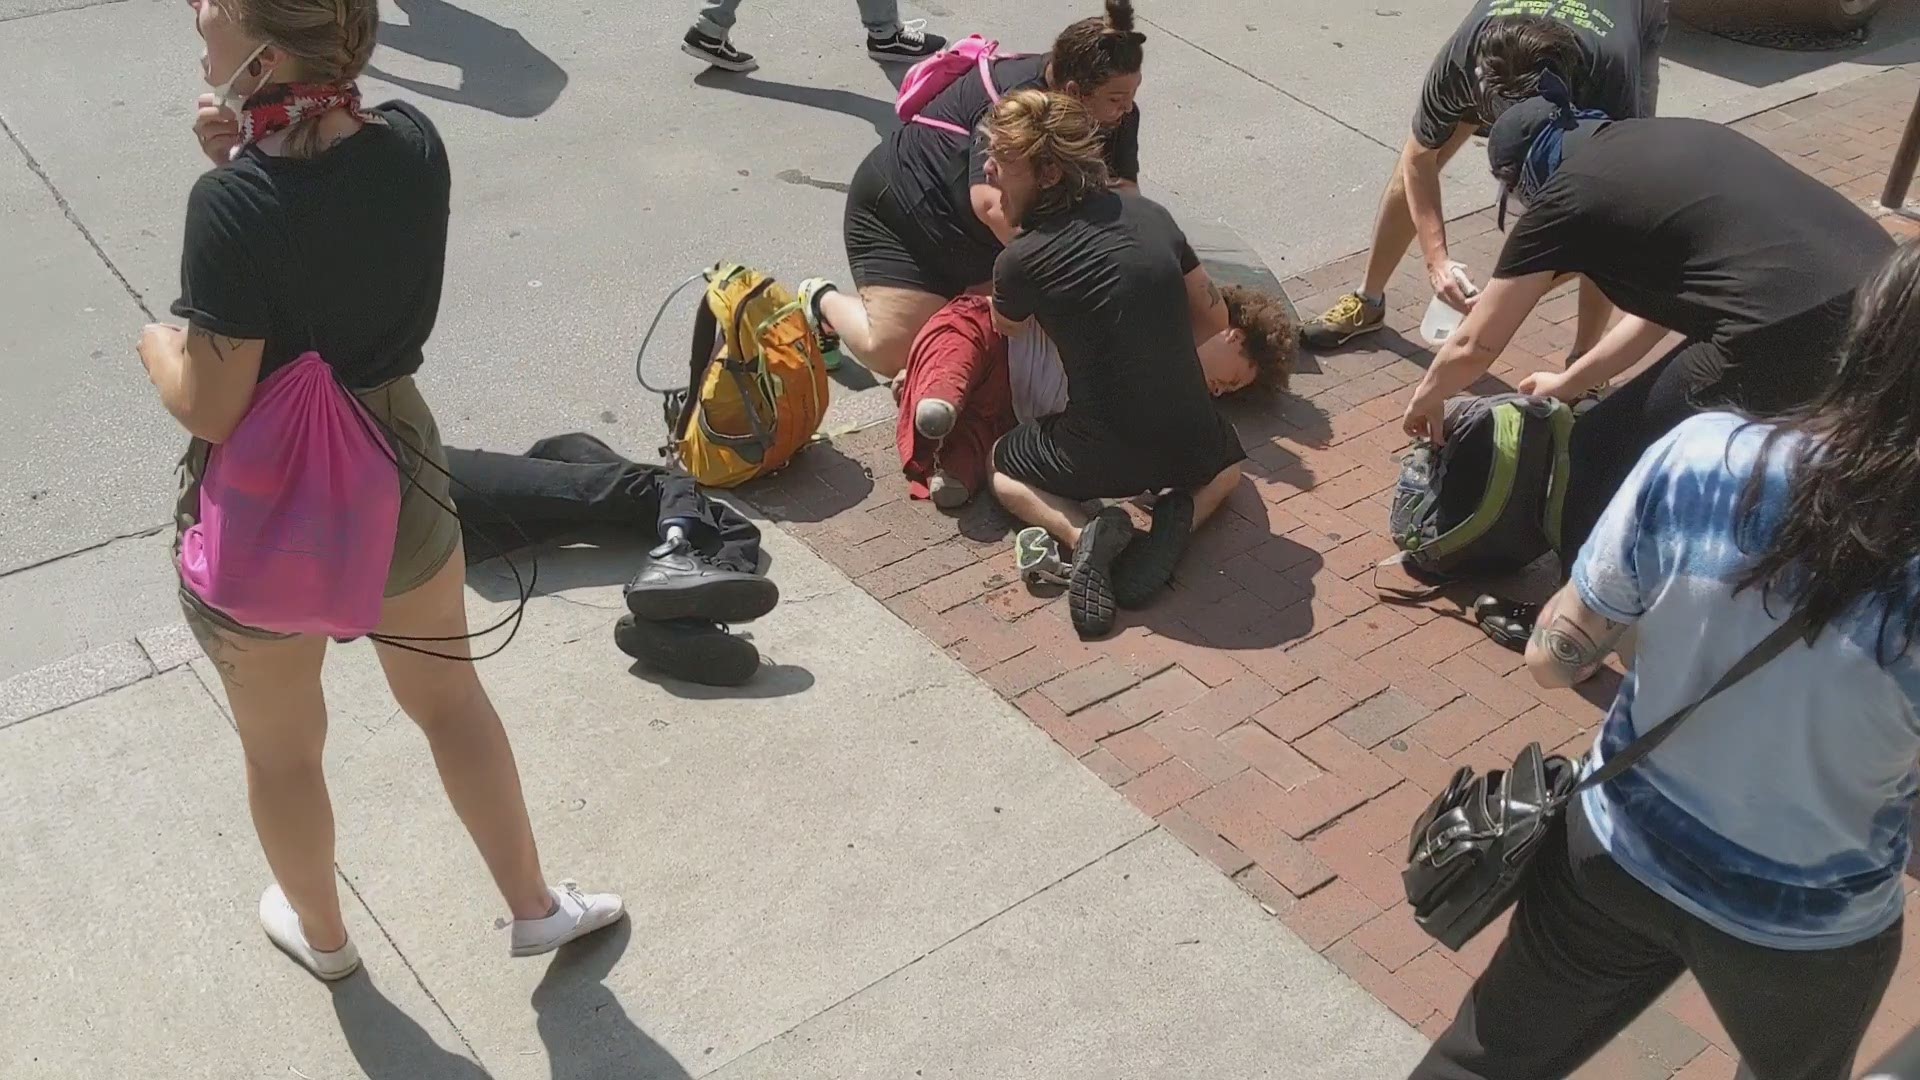 A video that when viral on social media shows a man with prosthetic legs curled on the sidewalk as others care for him and call for a medic.